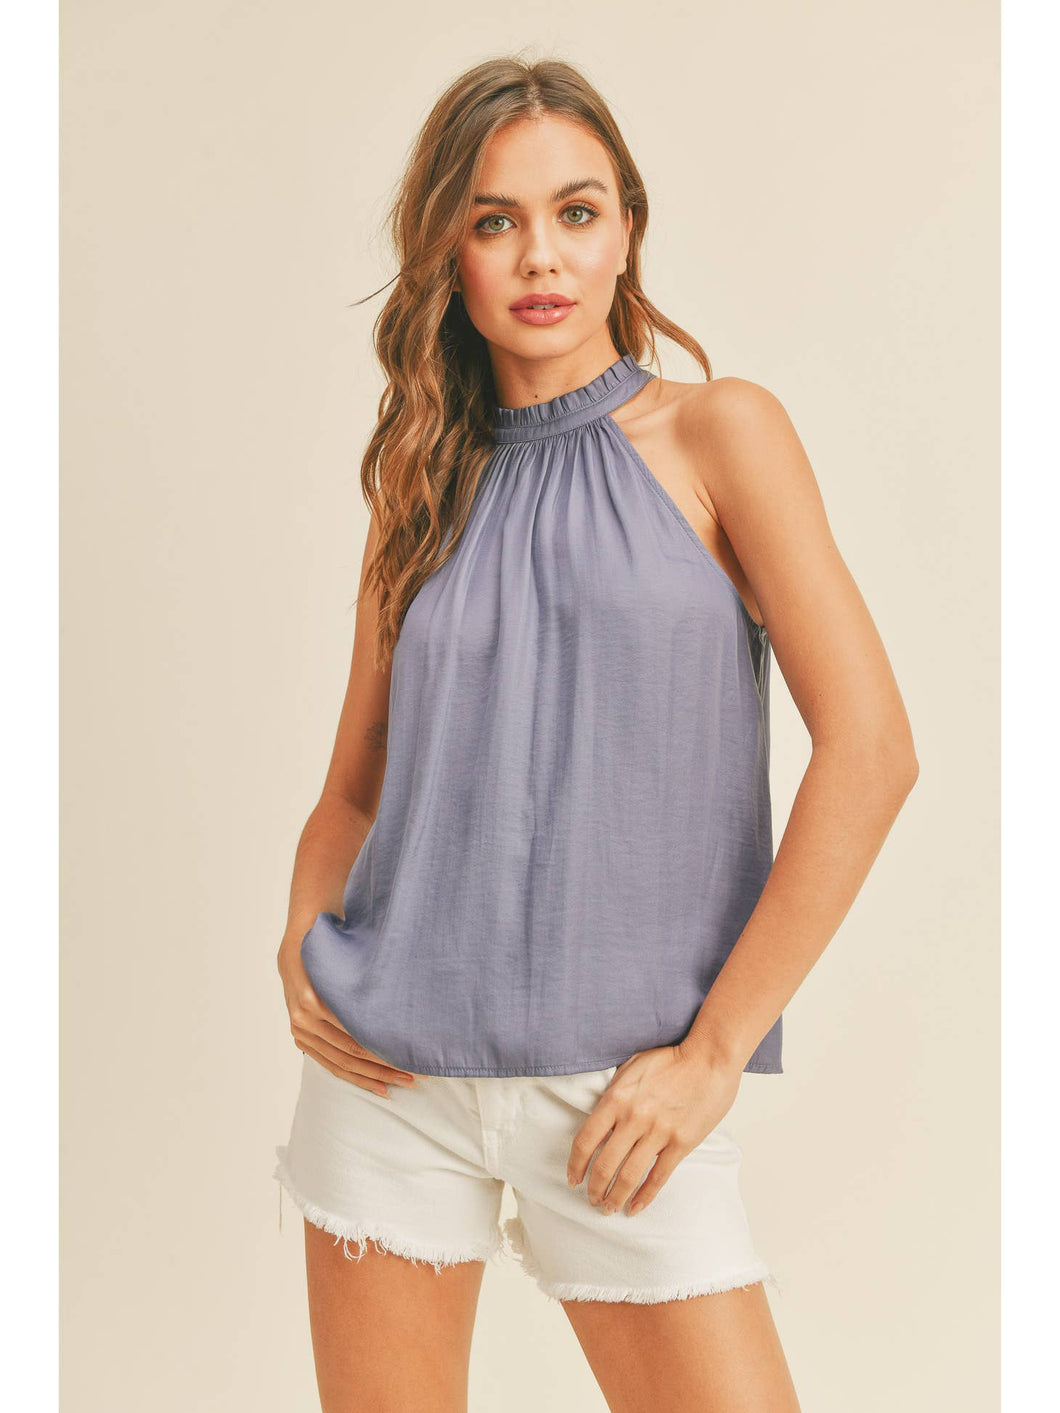 Perfectly Periwinkle Top